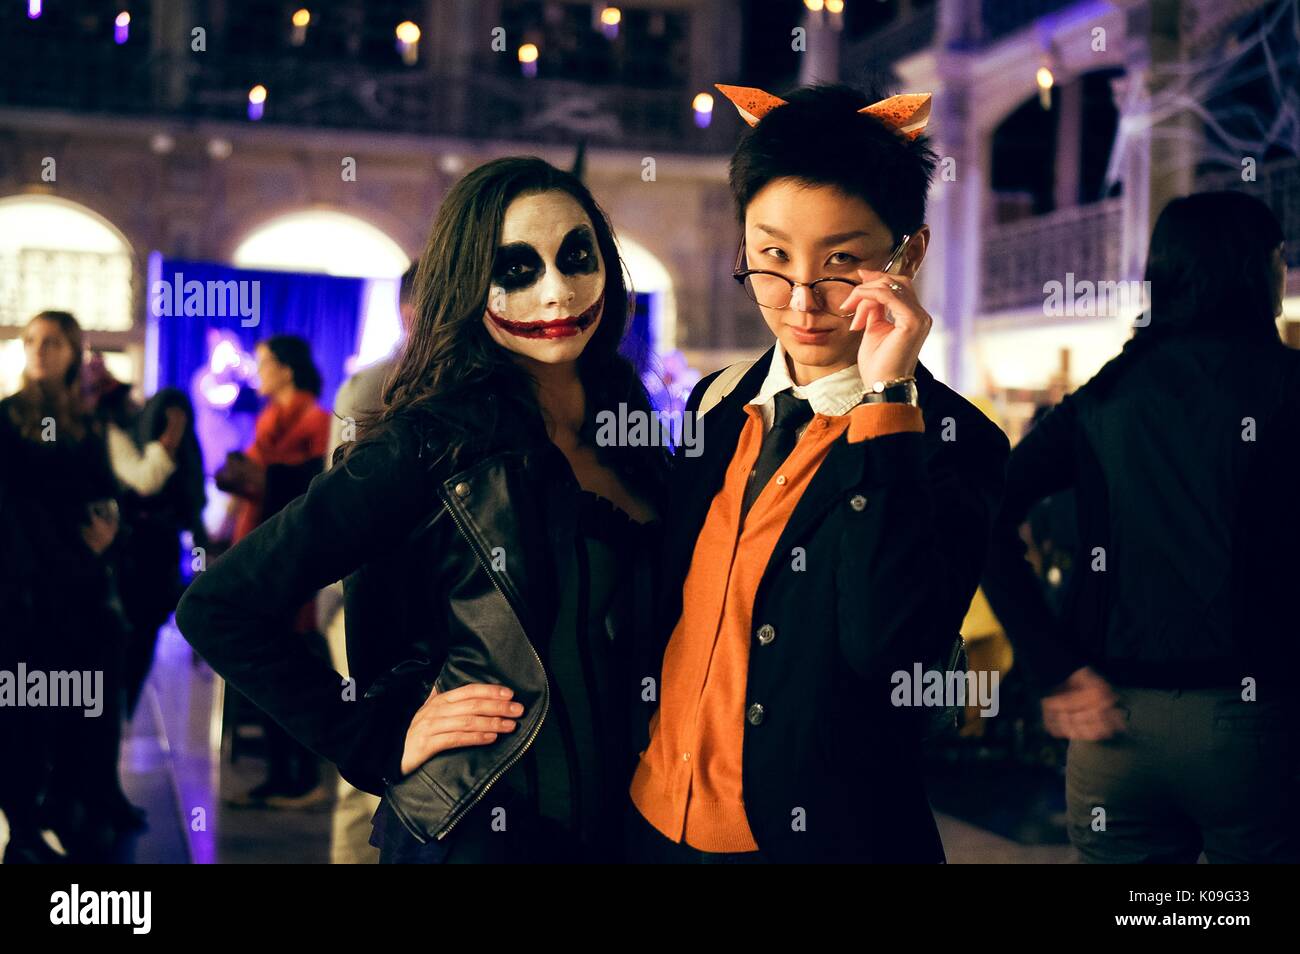 Two college students posing with their arms around each other, the girl is wearing all black and has face makeup on in the style of the character The Joker, she has a large red smile and black around her eyes and the boy is wearing orange ears, glasses and an orange and black outfit, 2015. Courtesy Eric Chen. Stock Photo